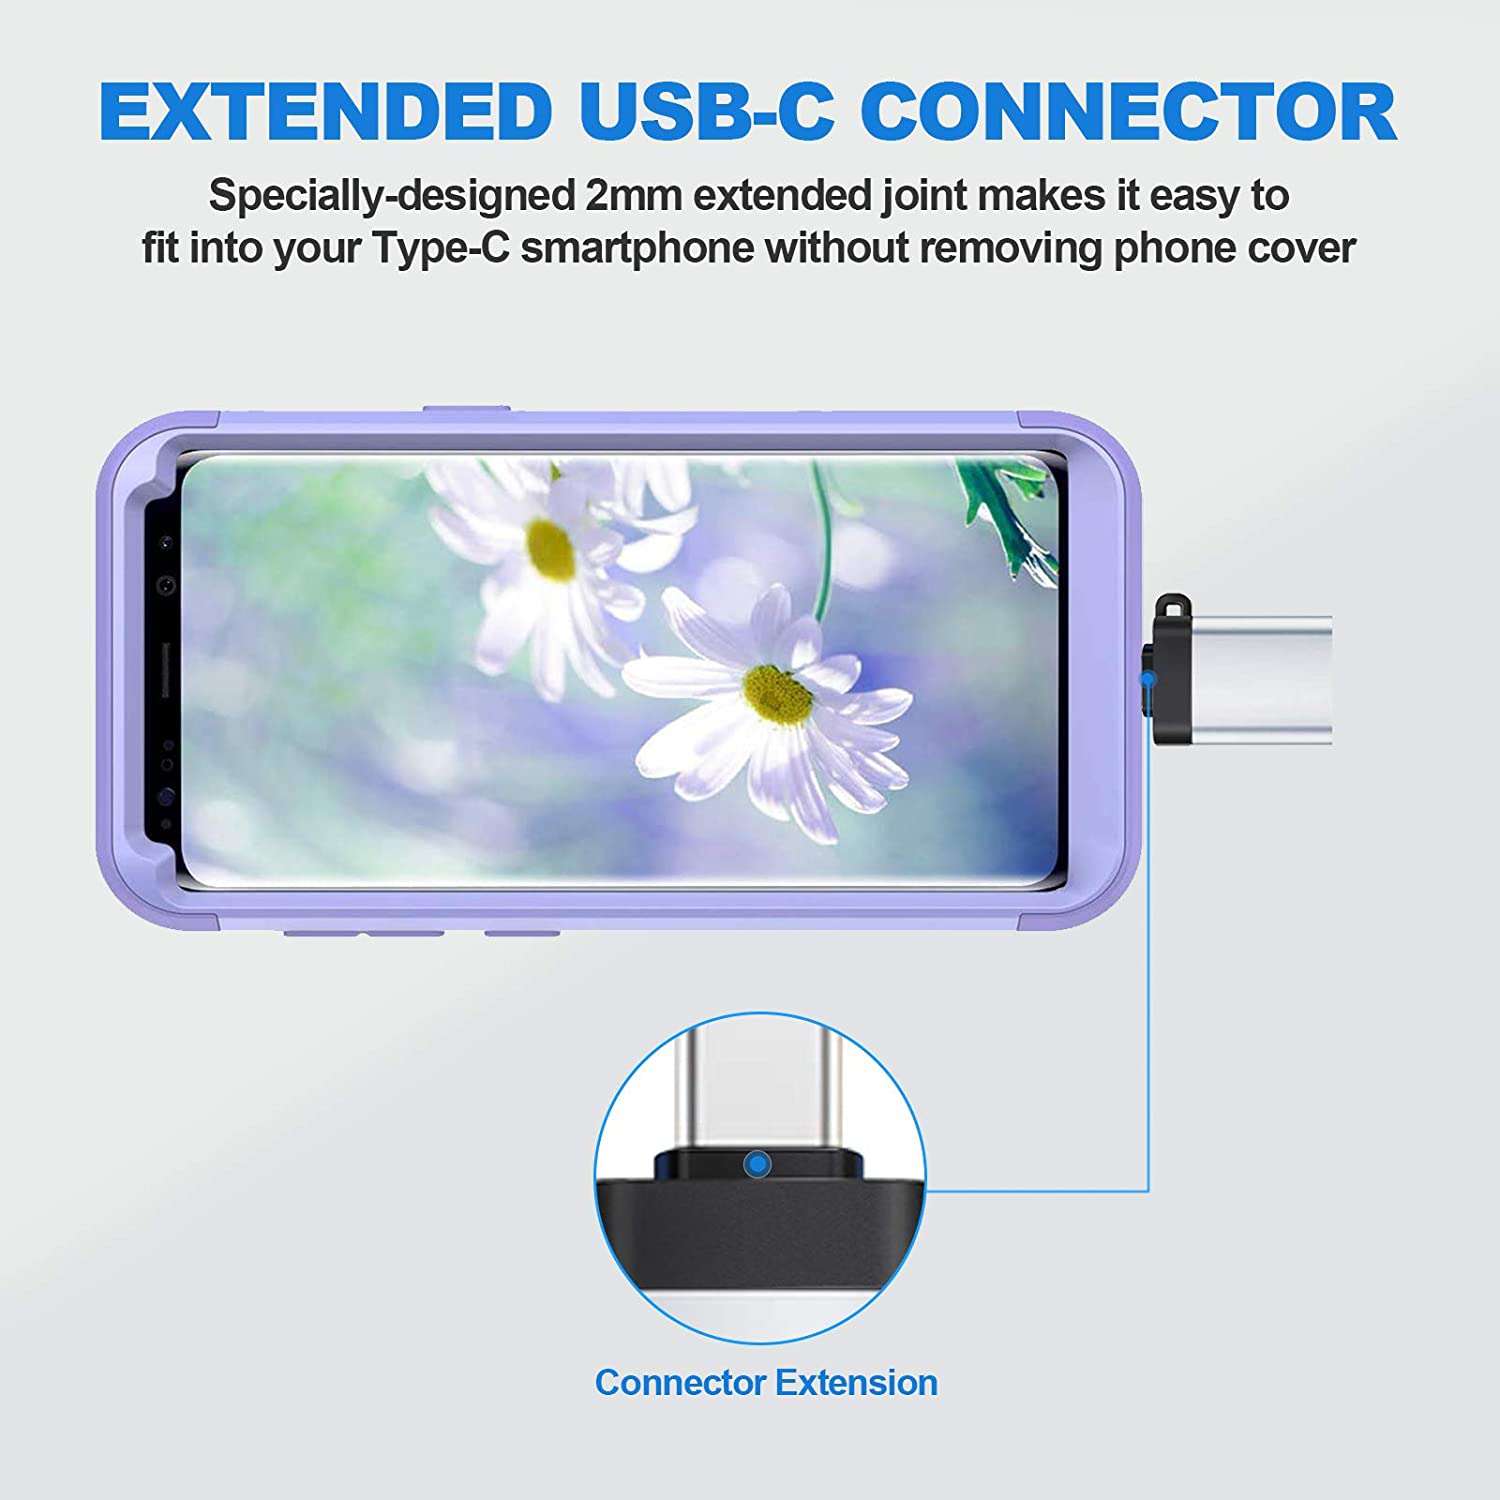 Specially designed with a 2mm extended connector, allowing you to plug in your phone without removing the phone case.